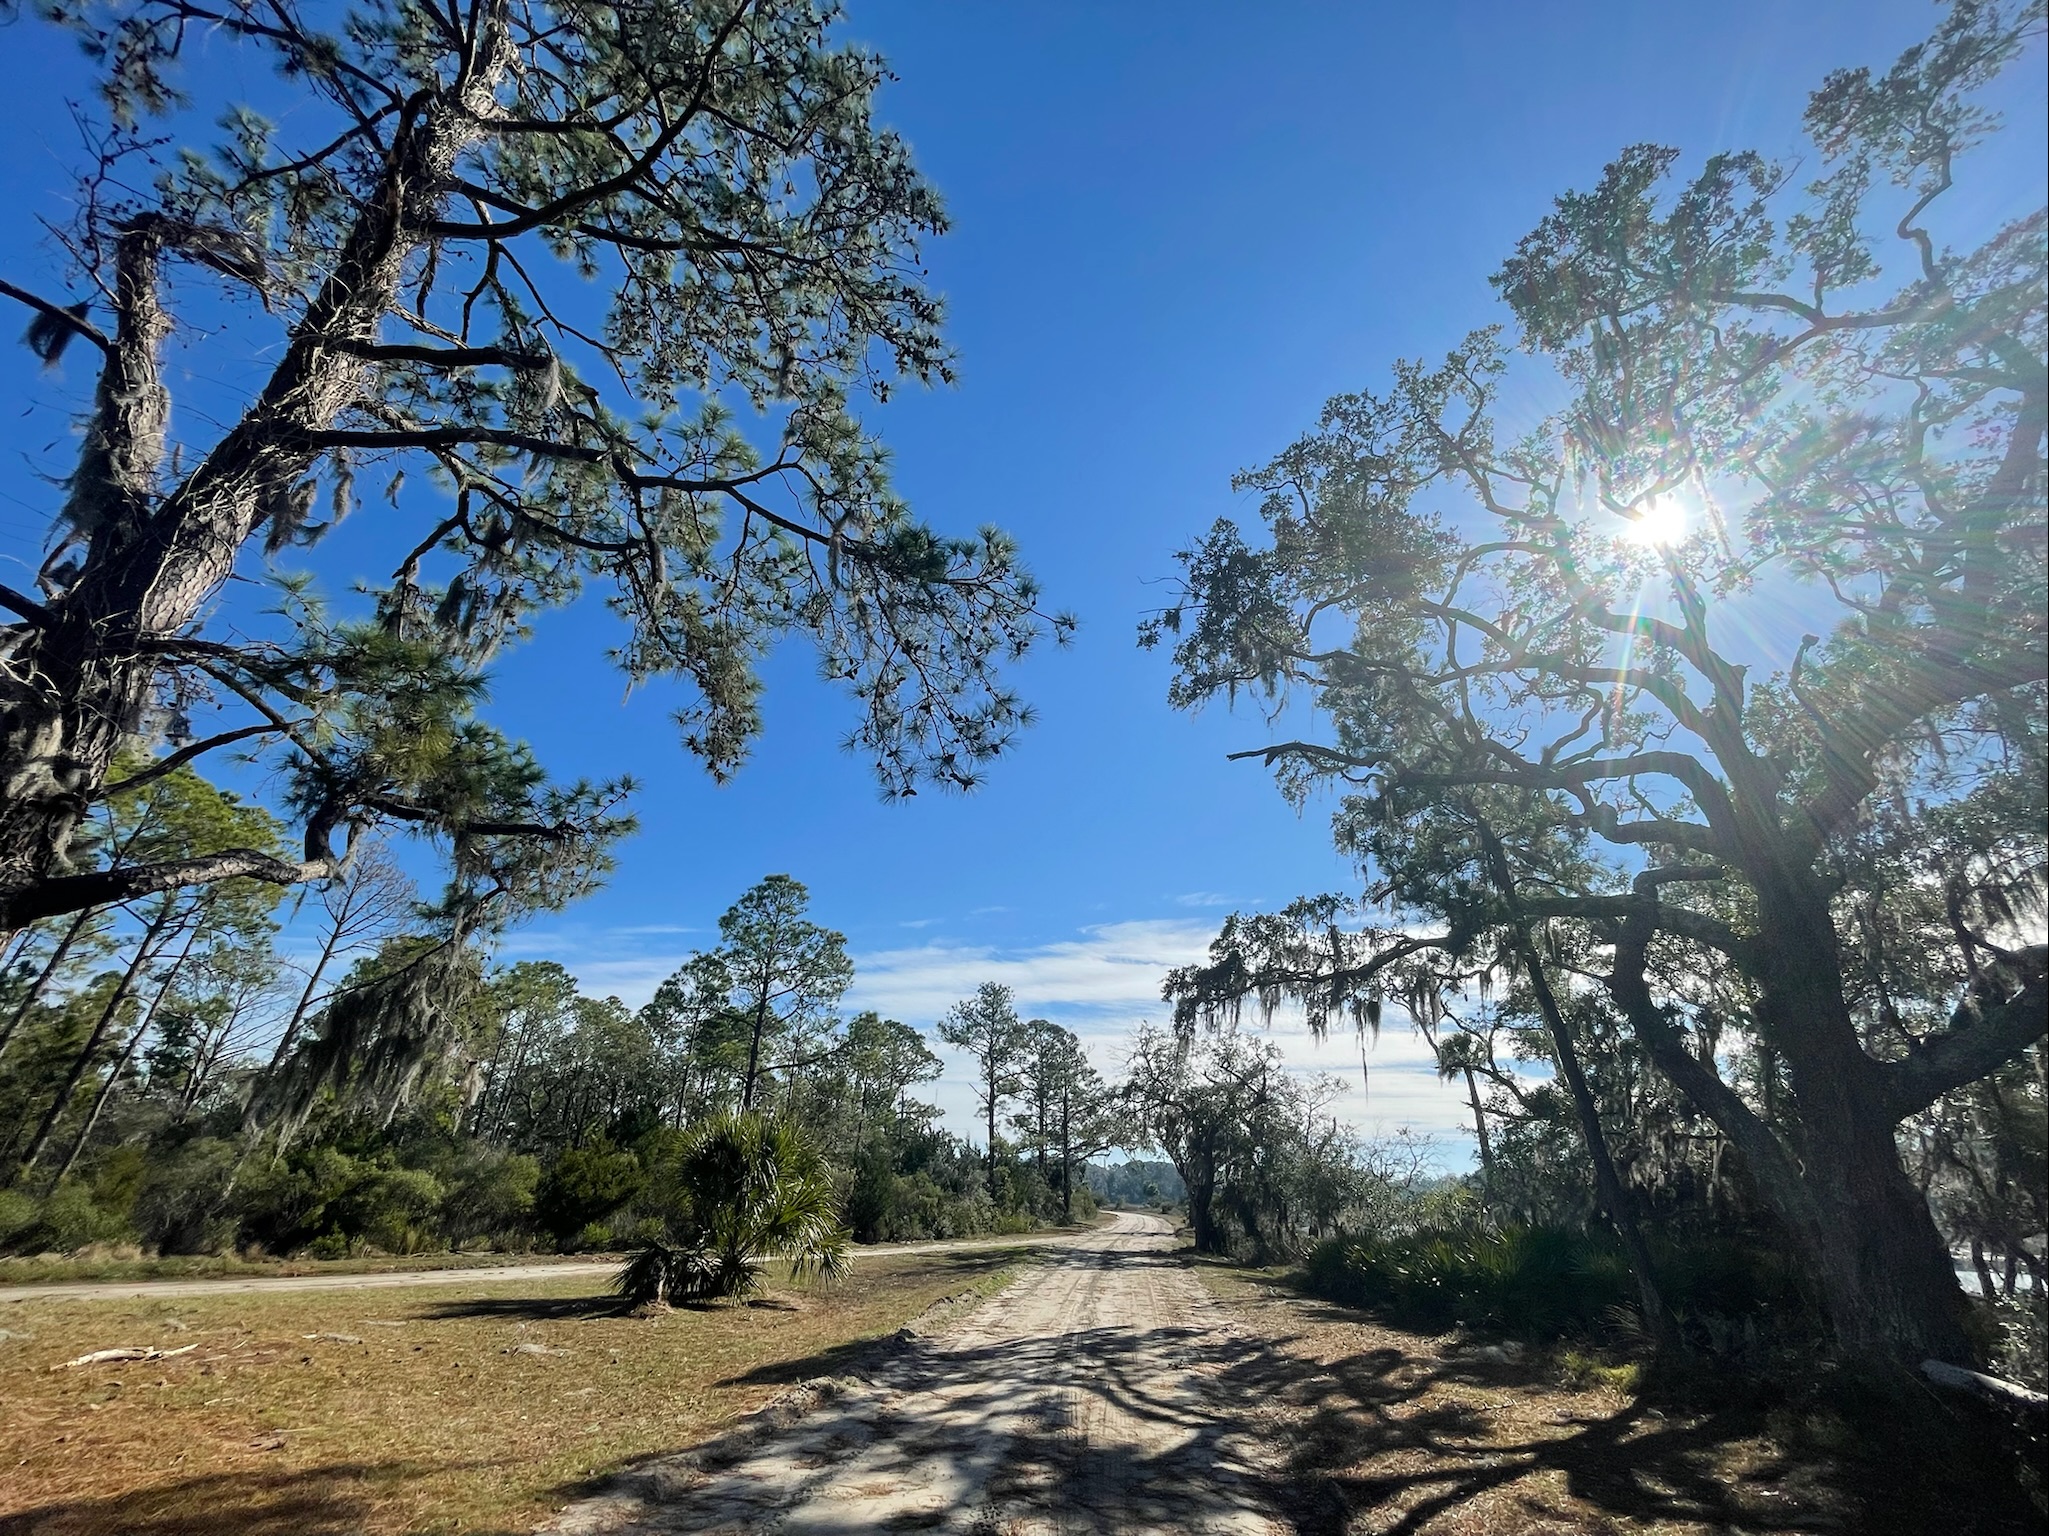 Beaufort County Protects 24 Acres for Public Use on St. Helena Island